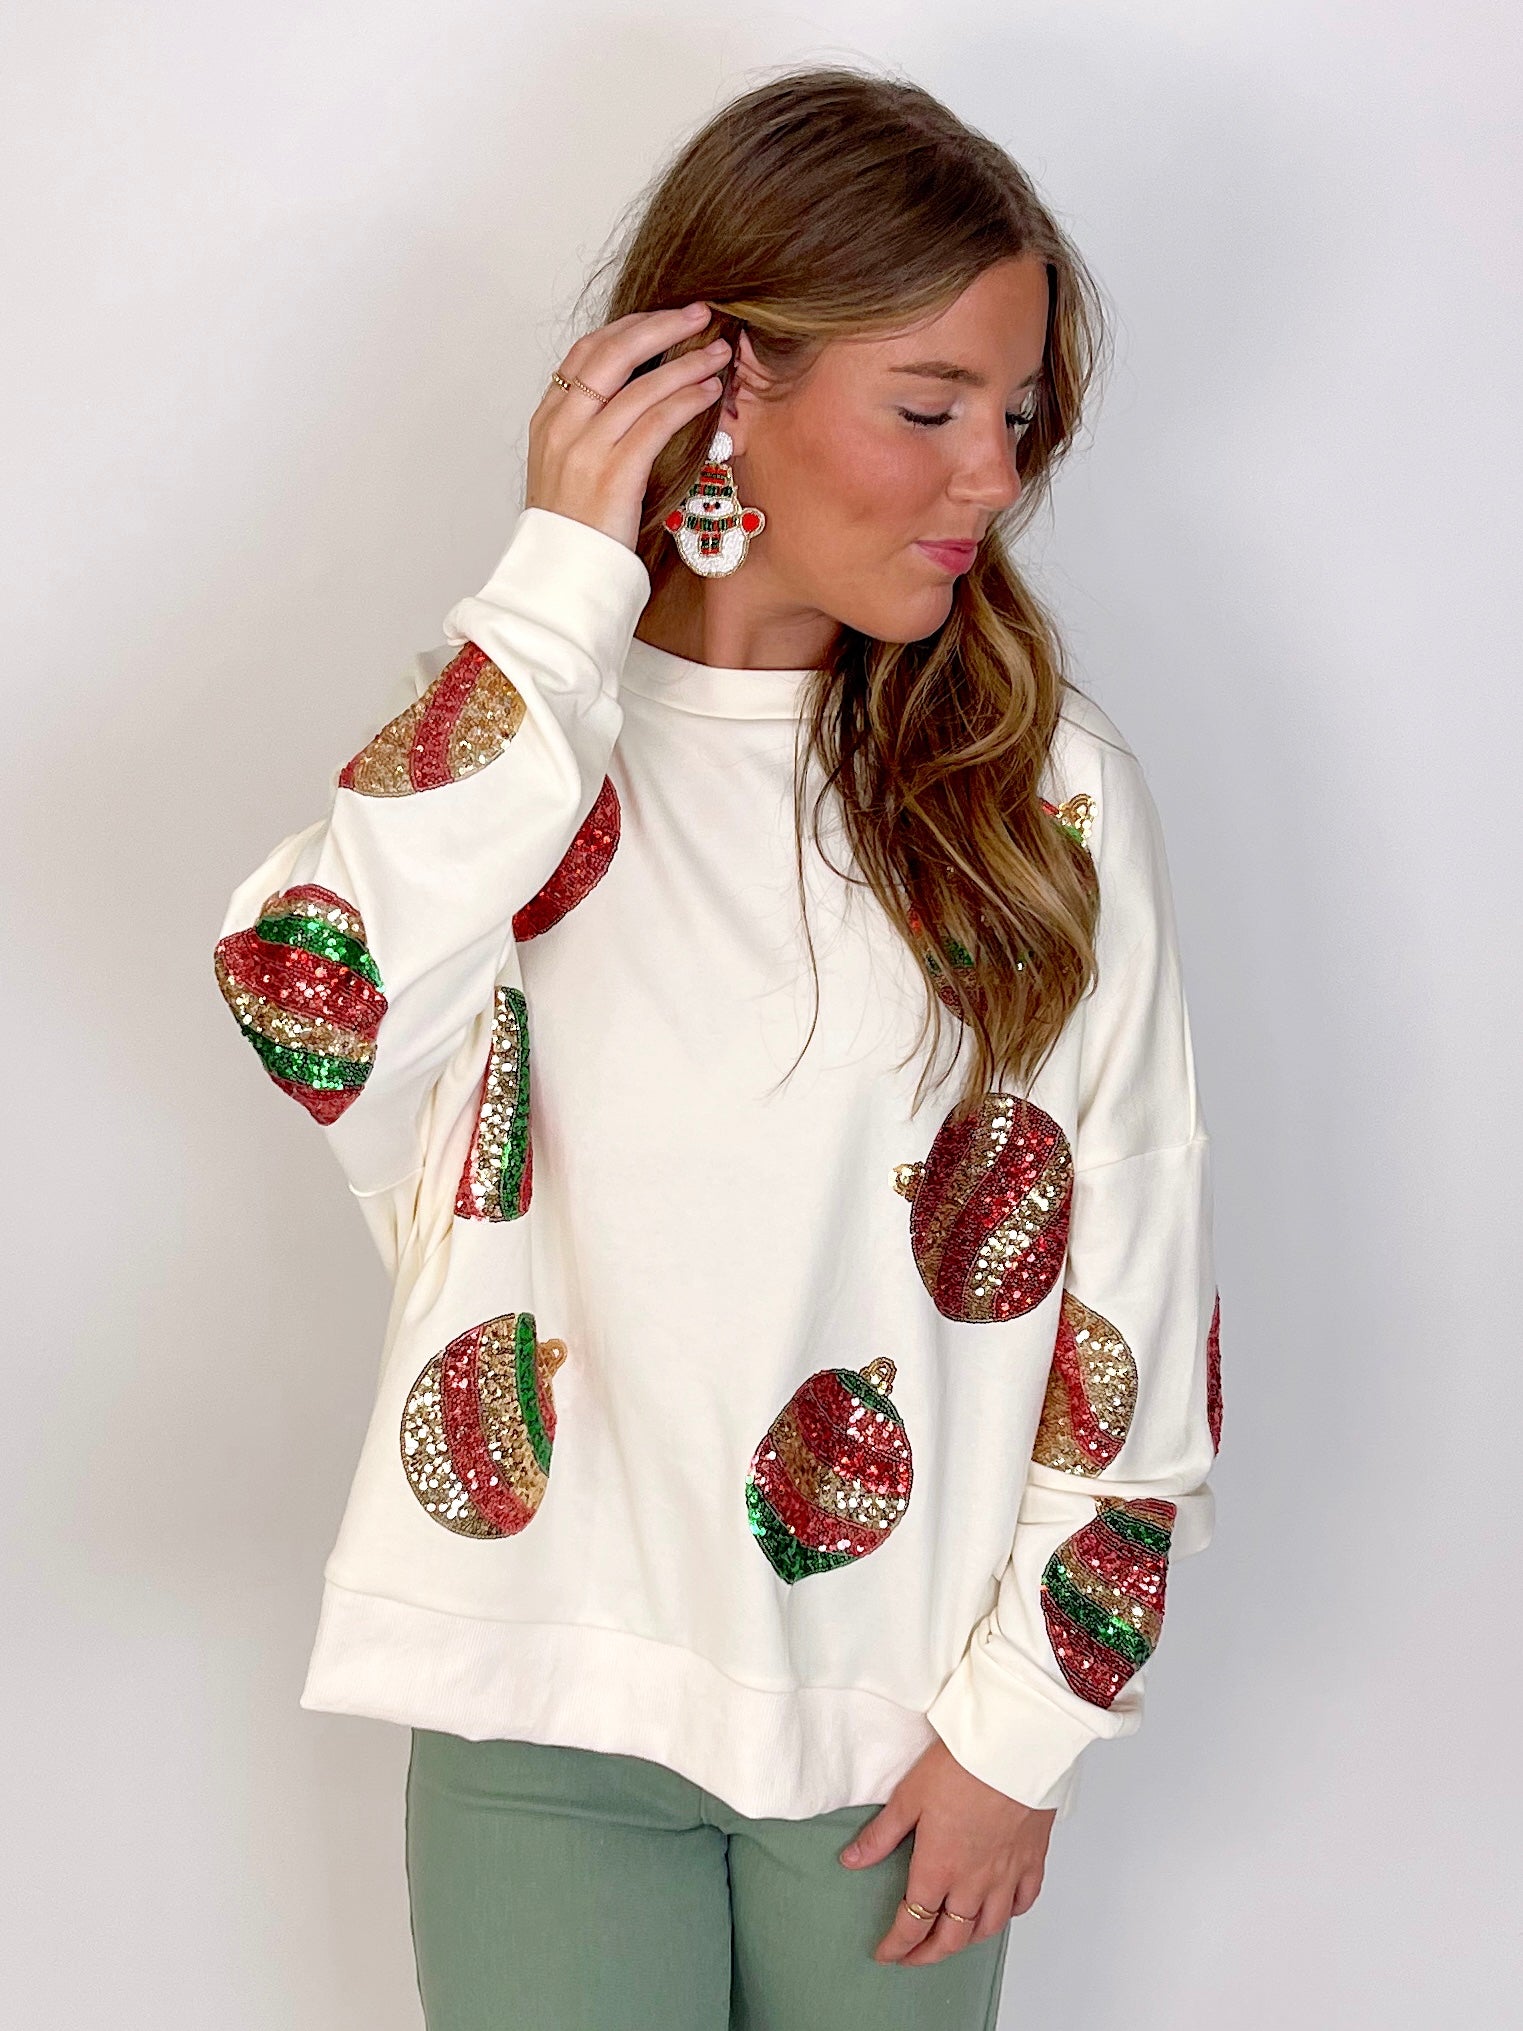 Deck the Halls Sweatshirt-Sweatshirt-Peach Love California-The Village Shoppe, Women’s Fashion Boutique, Shop Online and In Store - Located in Muscle Shoals, AL.